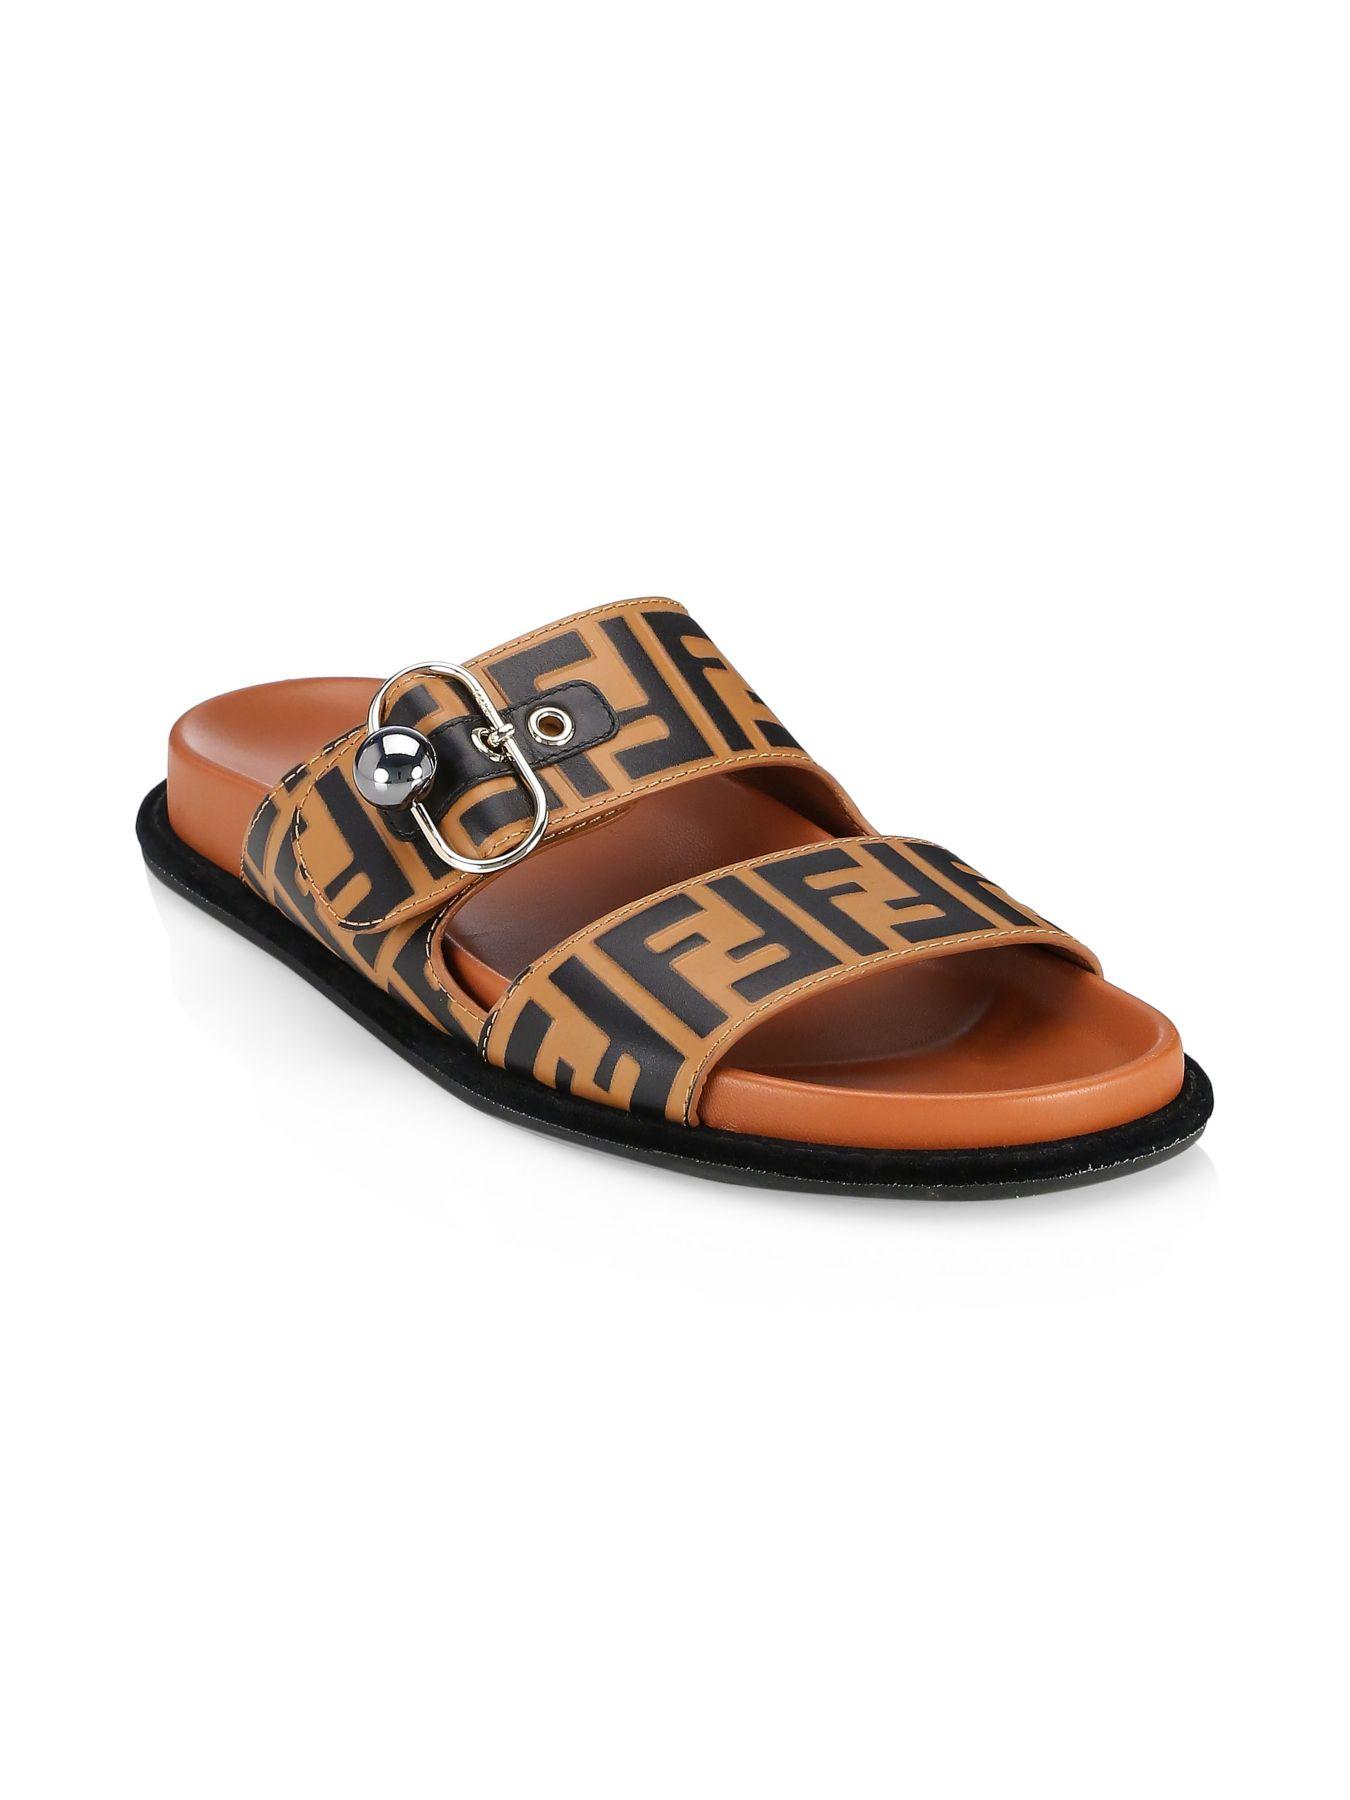 Fendi Leather Flat Sandals in Brown | Lyst